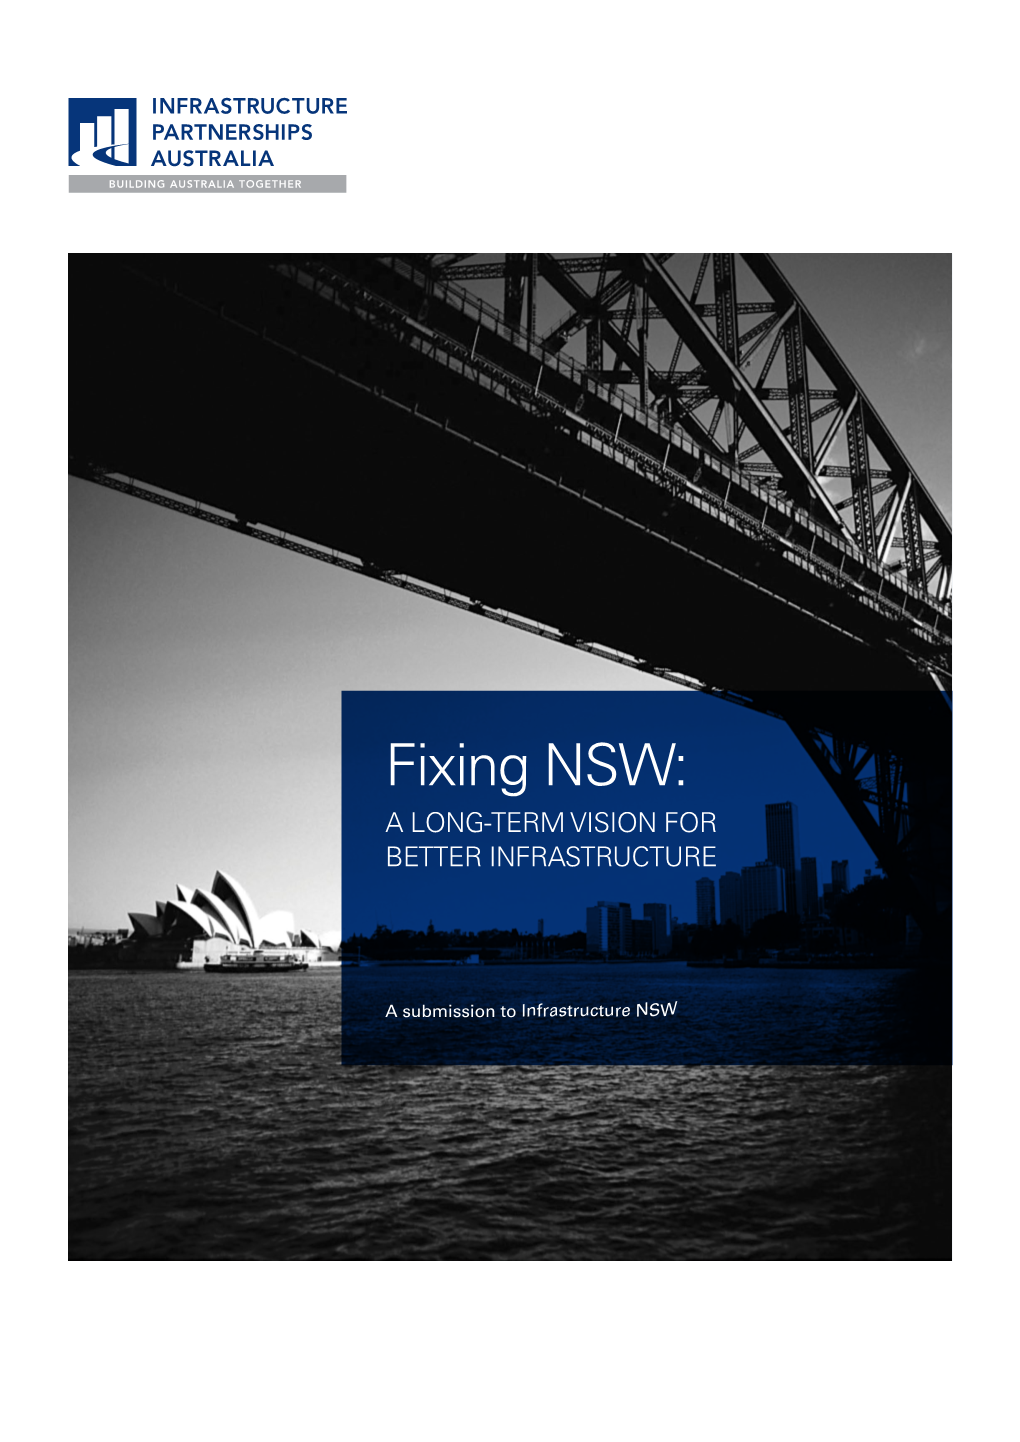 Fixing NSW: a Long-Term Vision for Better Infrastructure